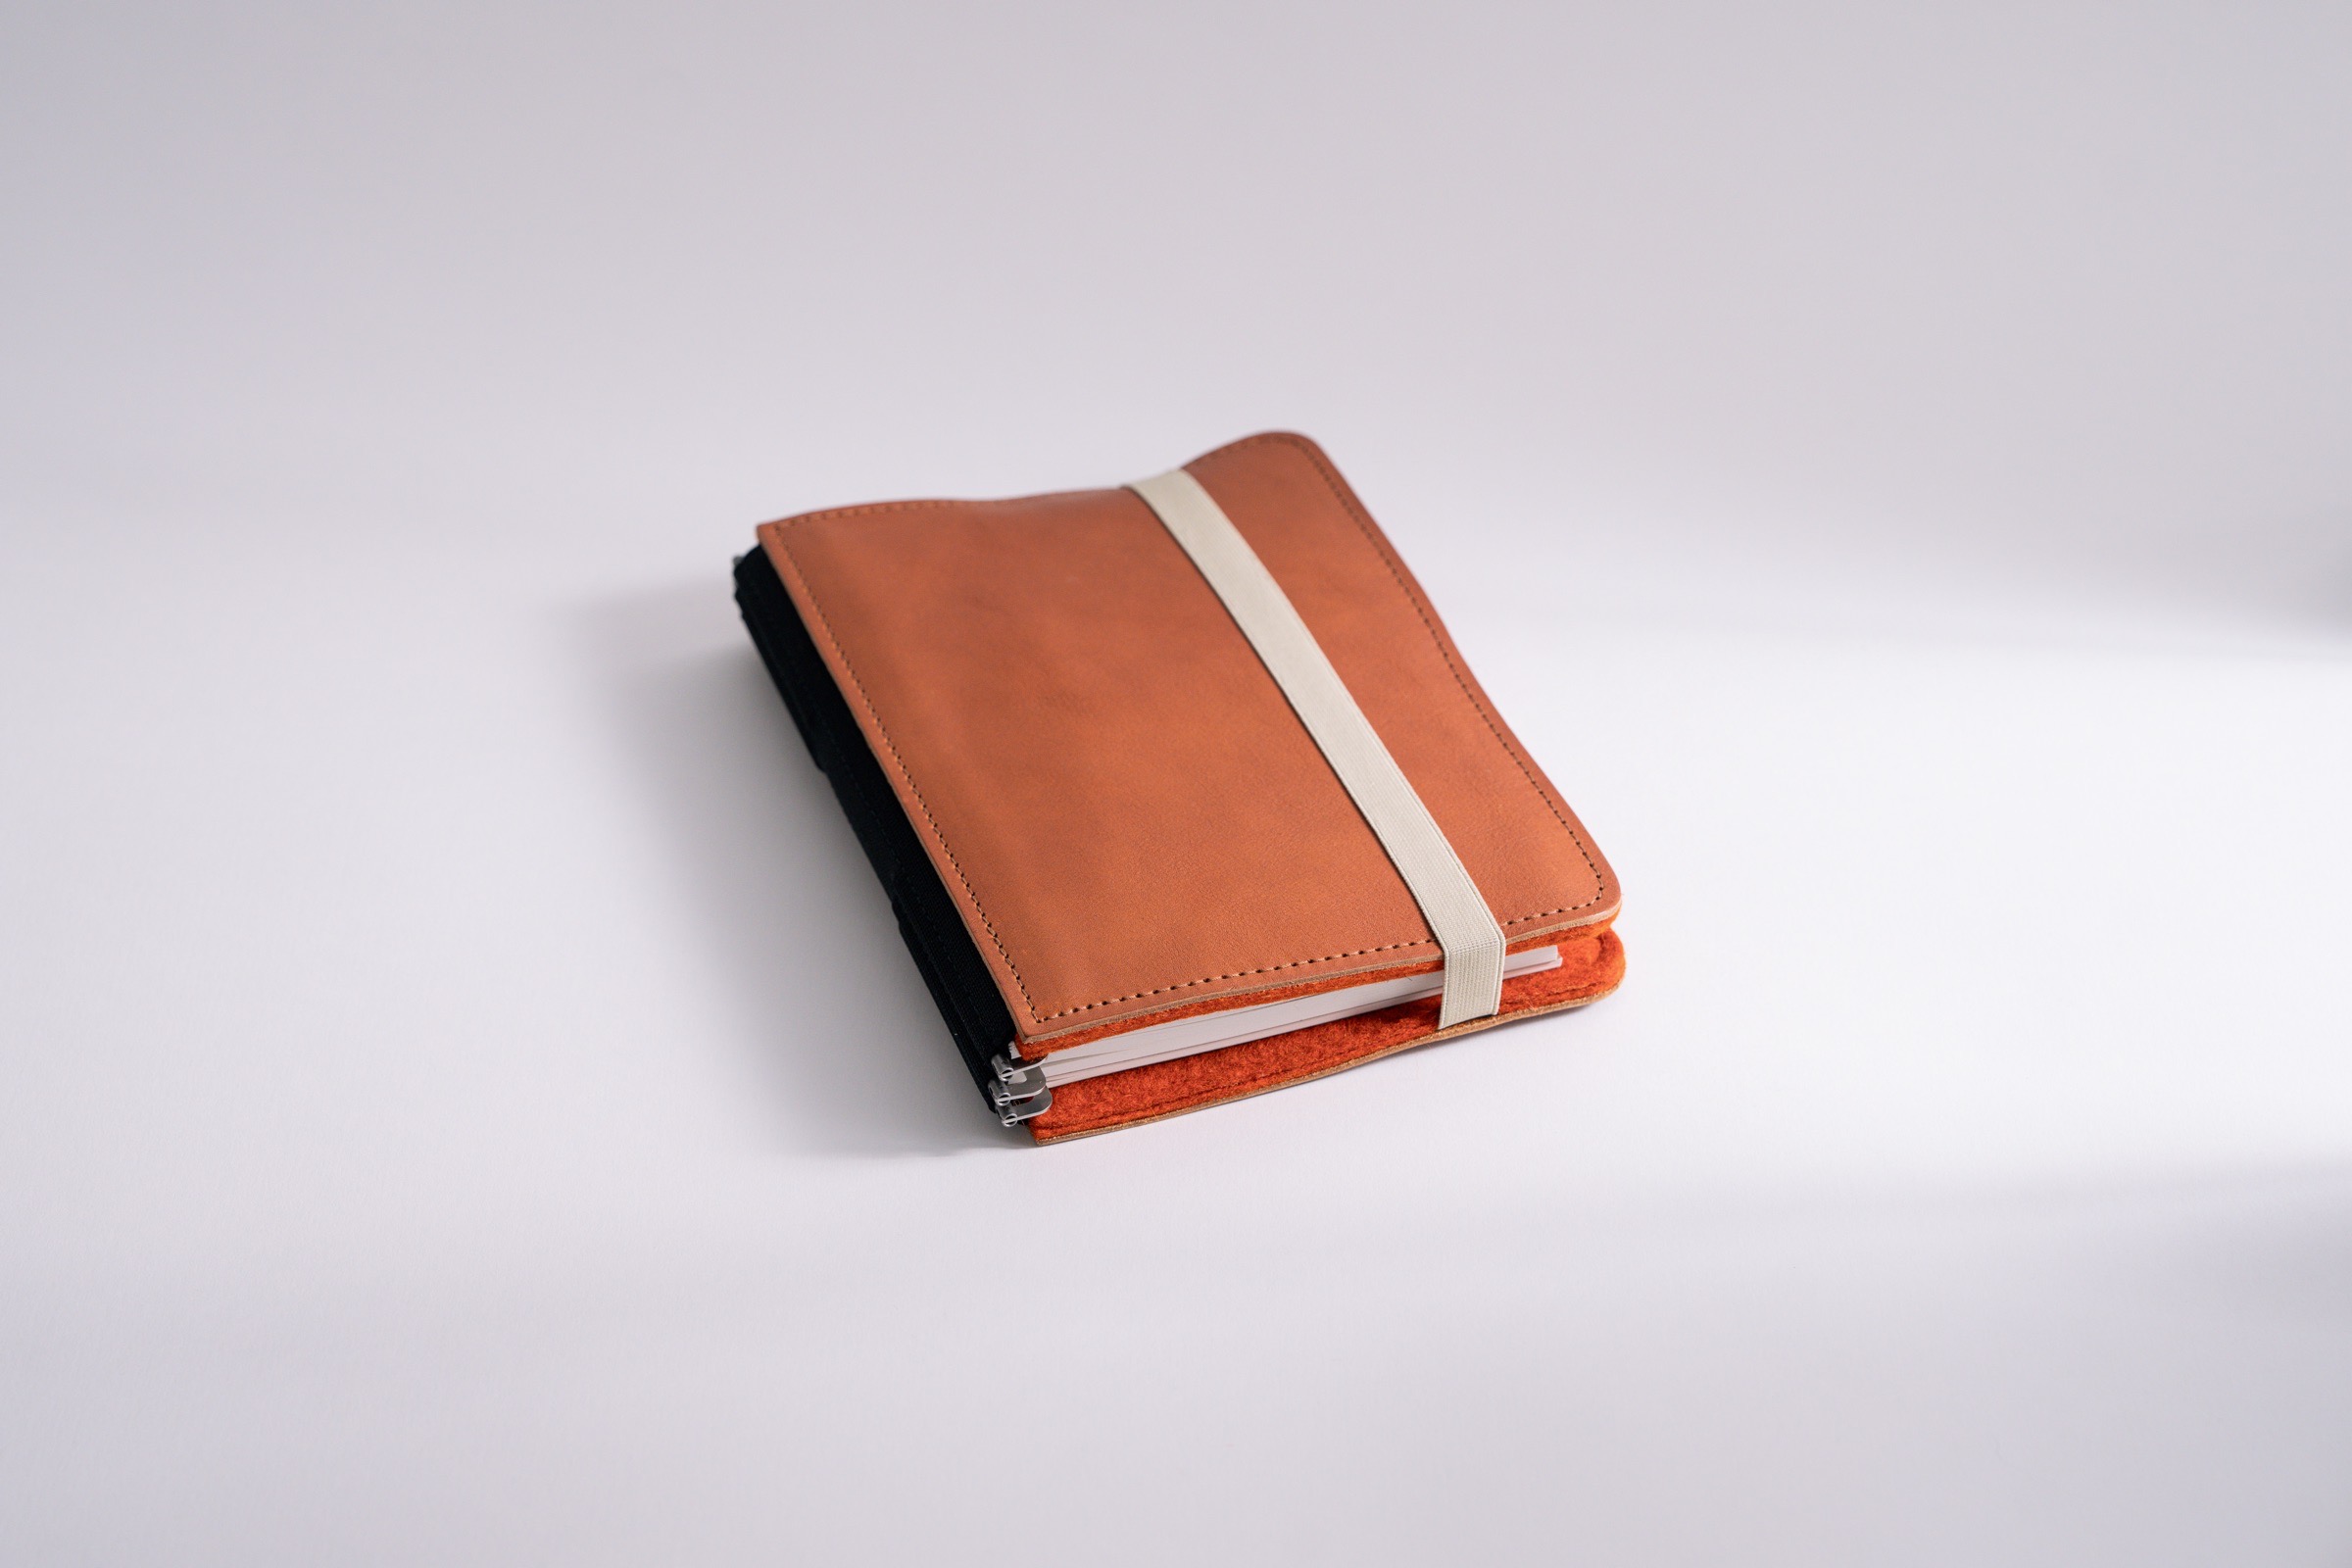 Roterfaden organizer LTD_029 in size M, with rust orange felt inside and light brown leather outside with elastic closure.